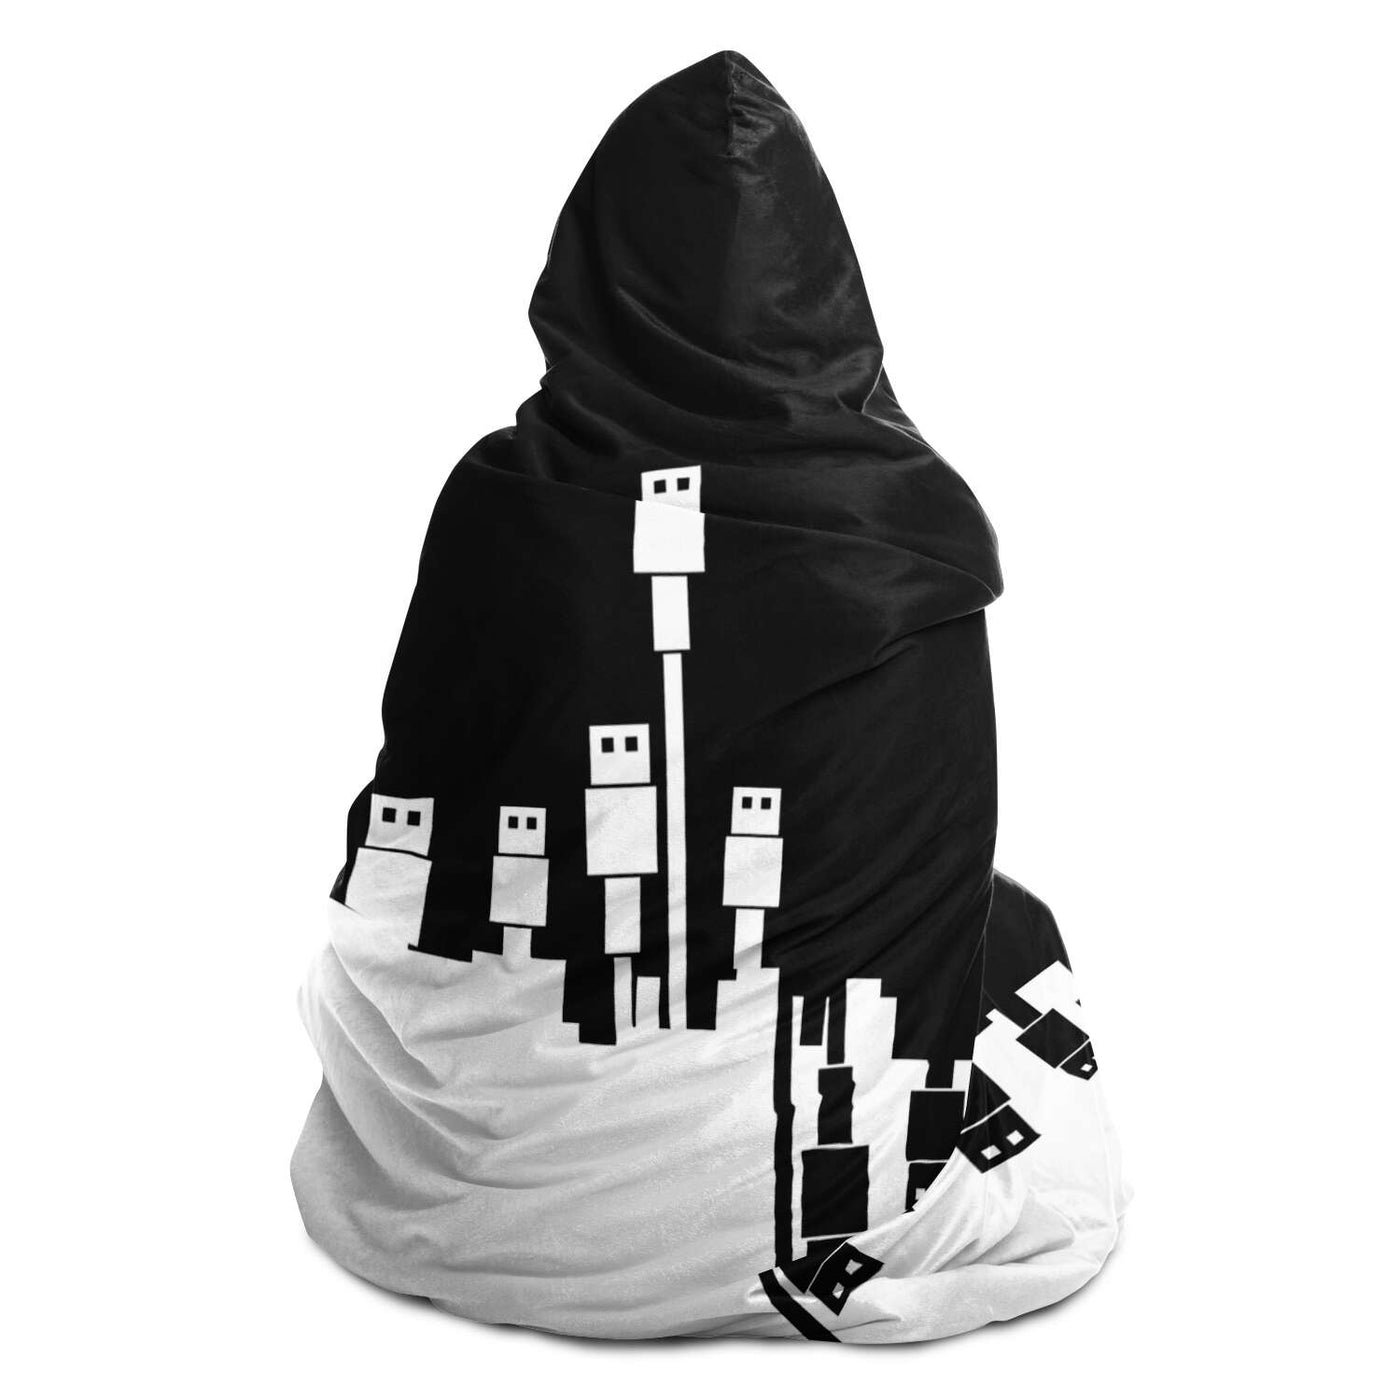 USB Ninja Cable Attack - Hooded Blanket